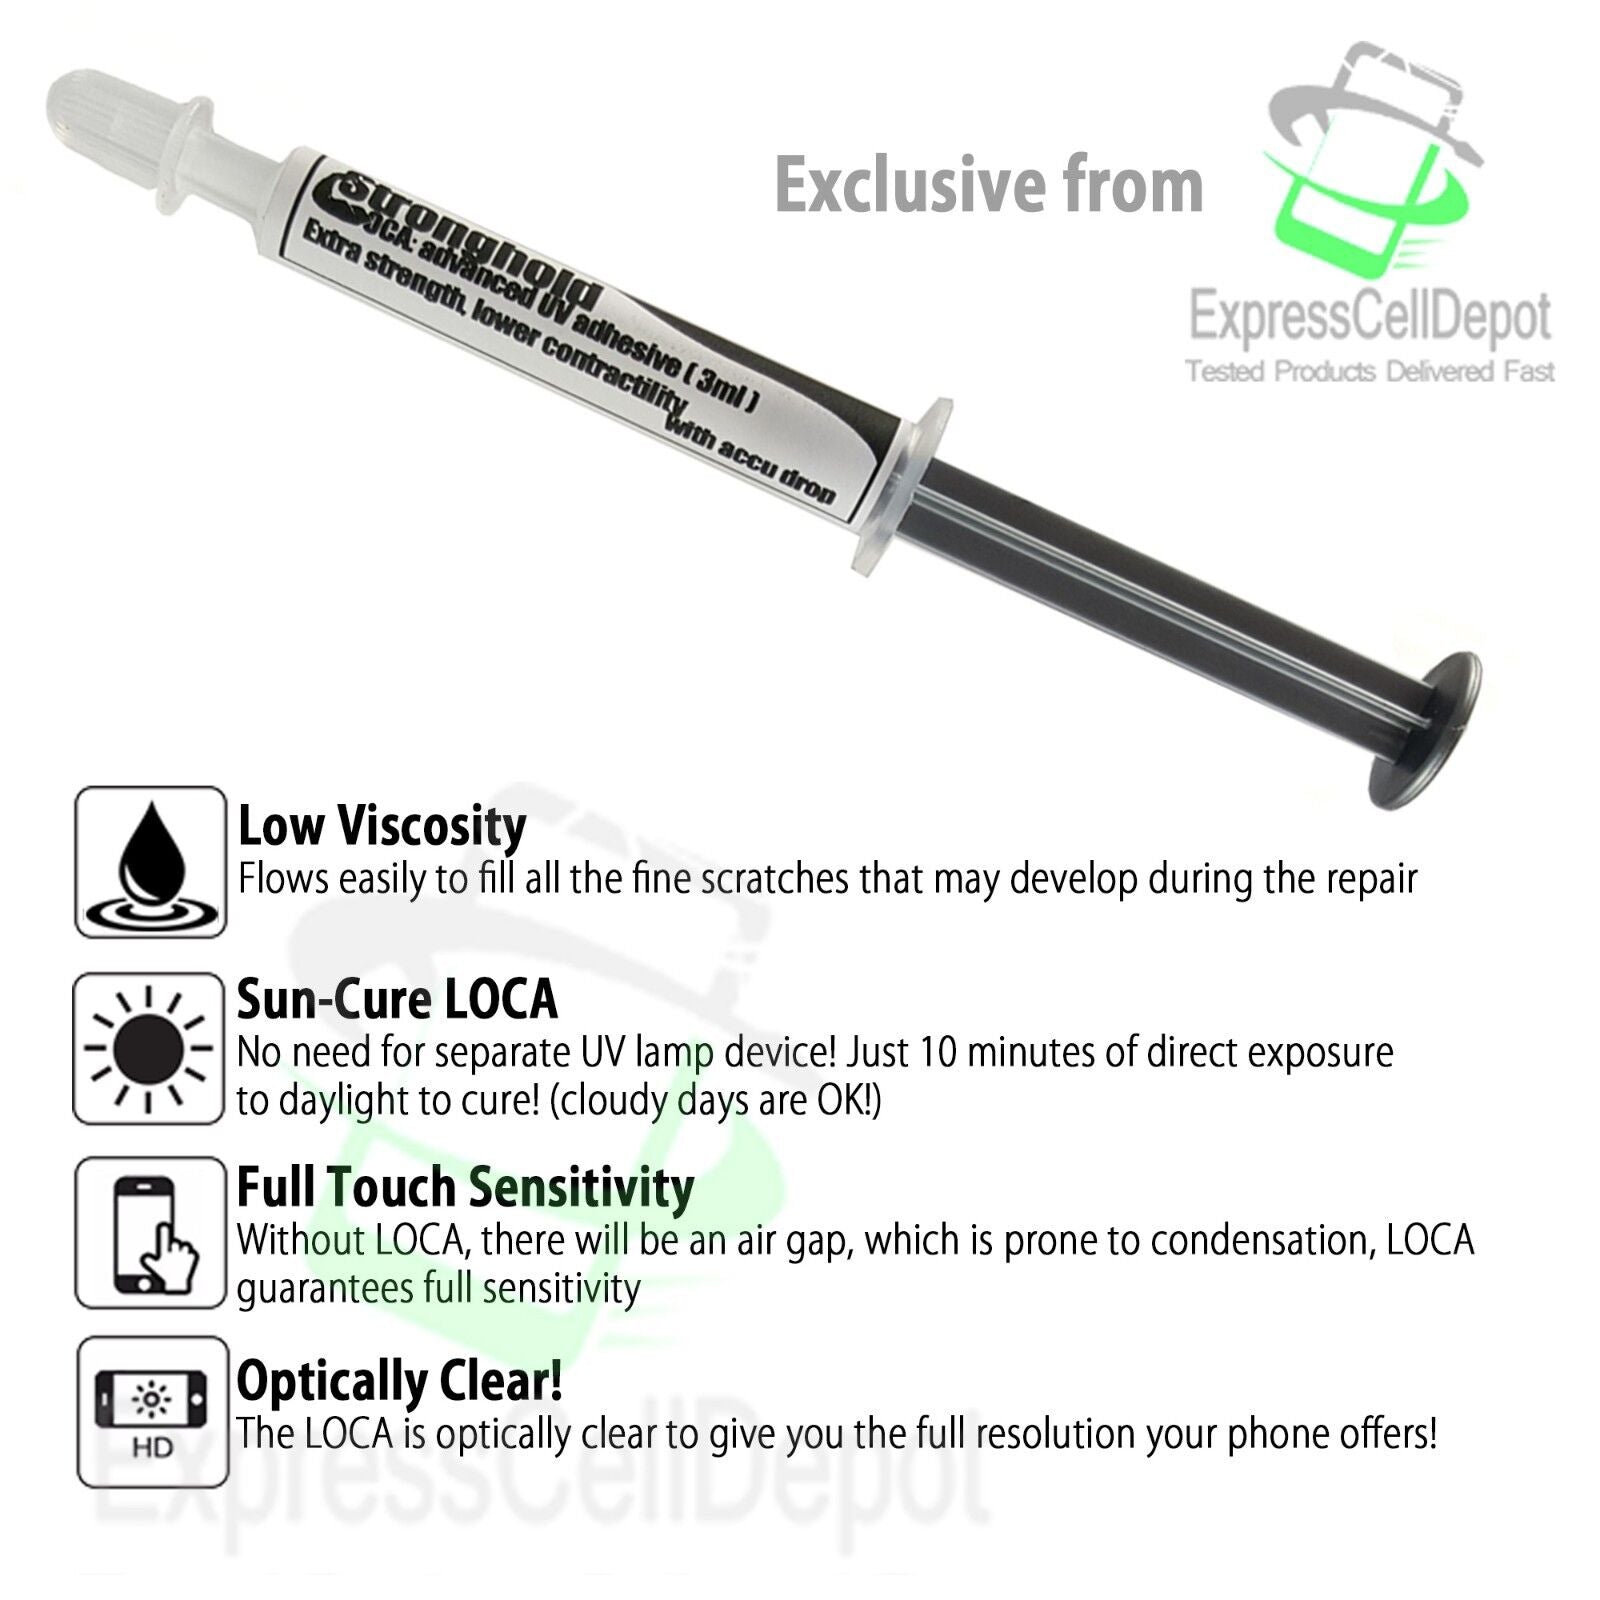 A Second Chance! 3mL Stronghold LOCA UV Glue with Sun-Cure Capability